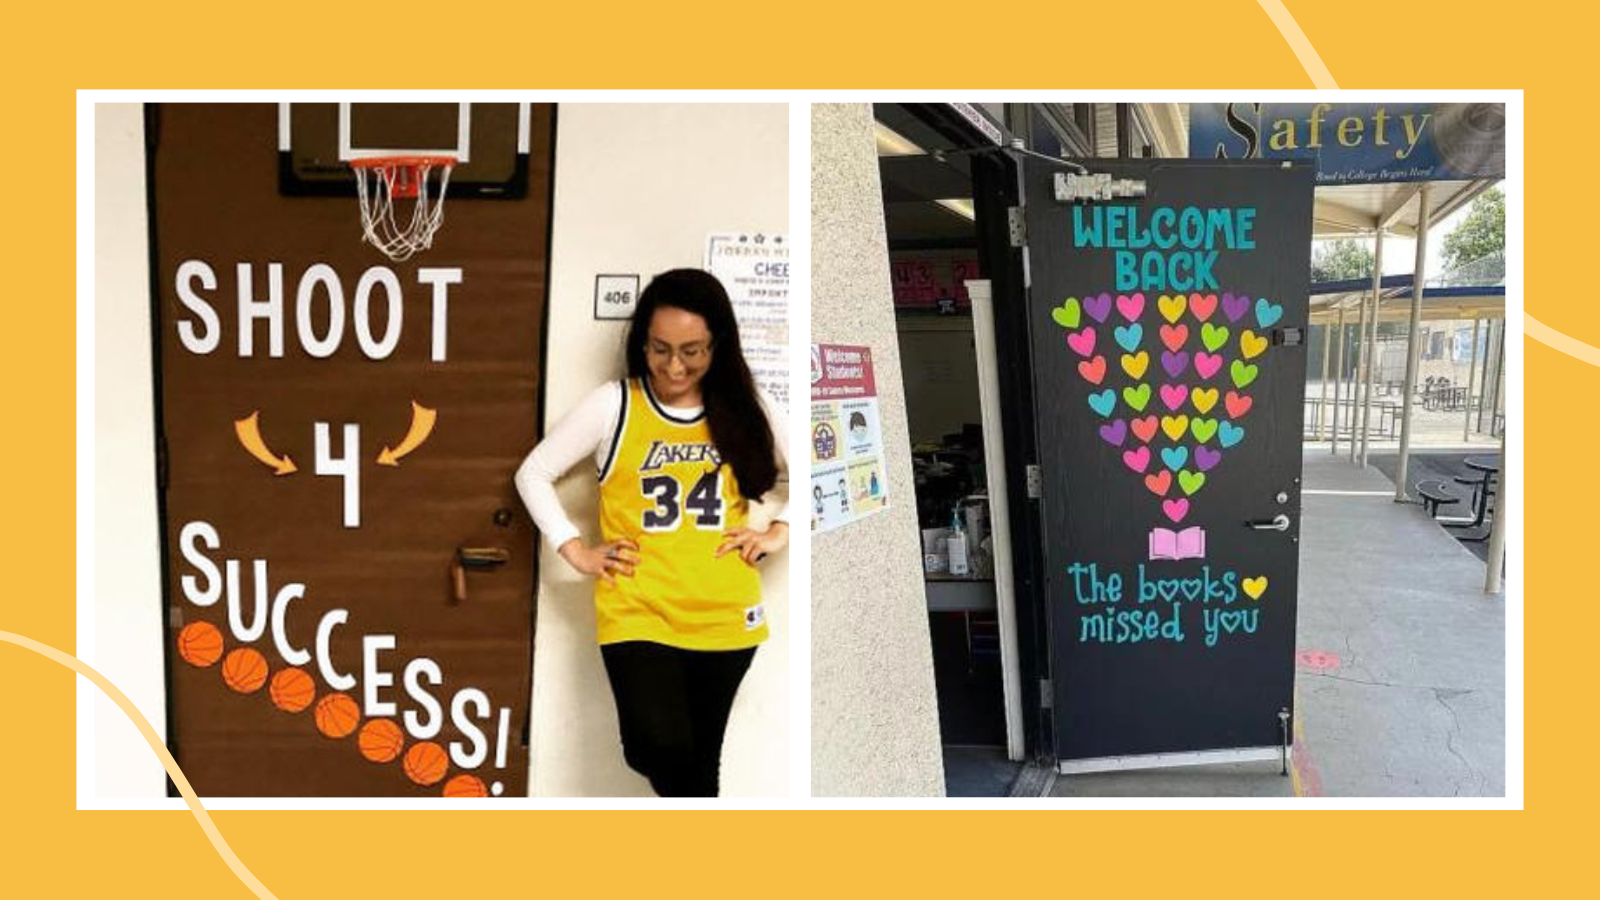 Classroom door decorations for back to school including one that features hearts and says Welcome Back the Books Missed you and one that has a basketball hoop and says Shoot 4 Success.